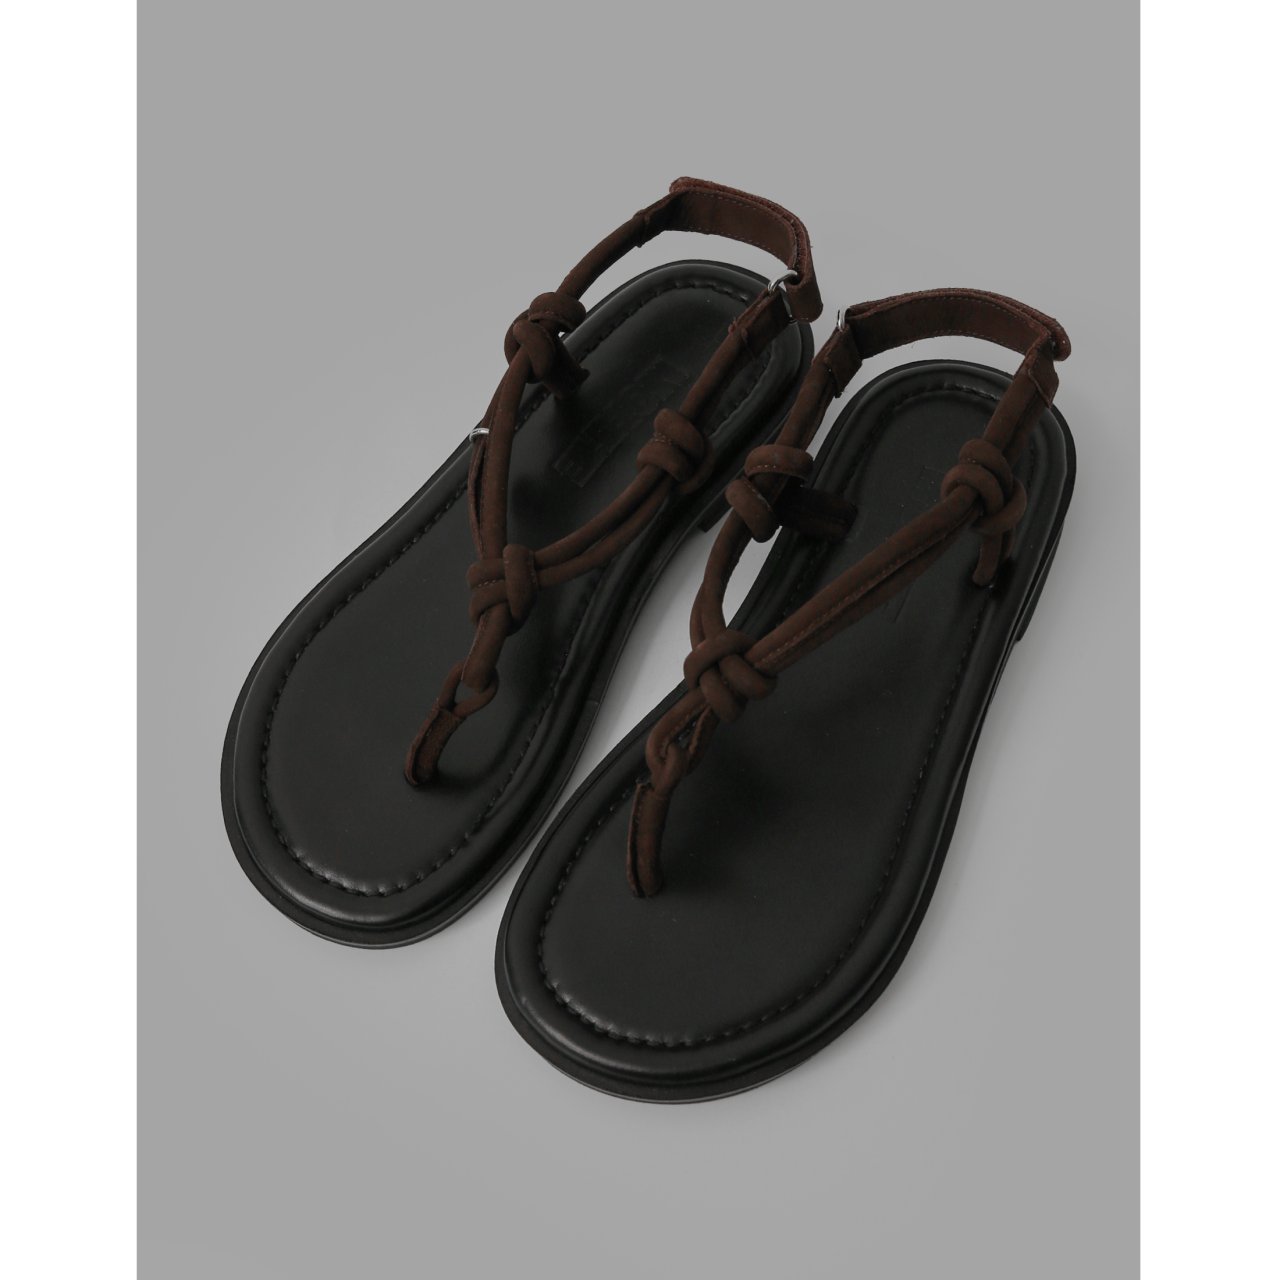 goat skin sandals with knot detail [order to made, 7-10일 소요 예정]